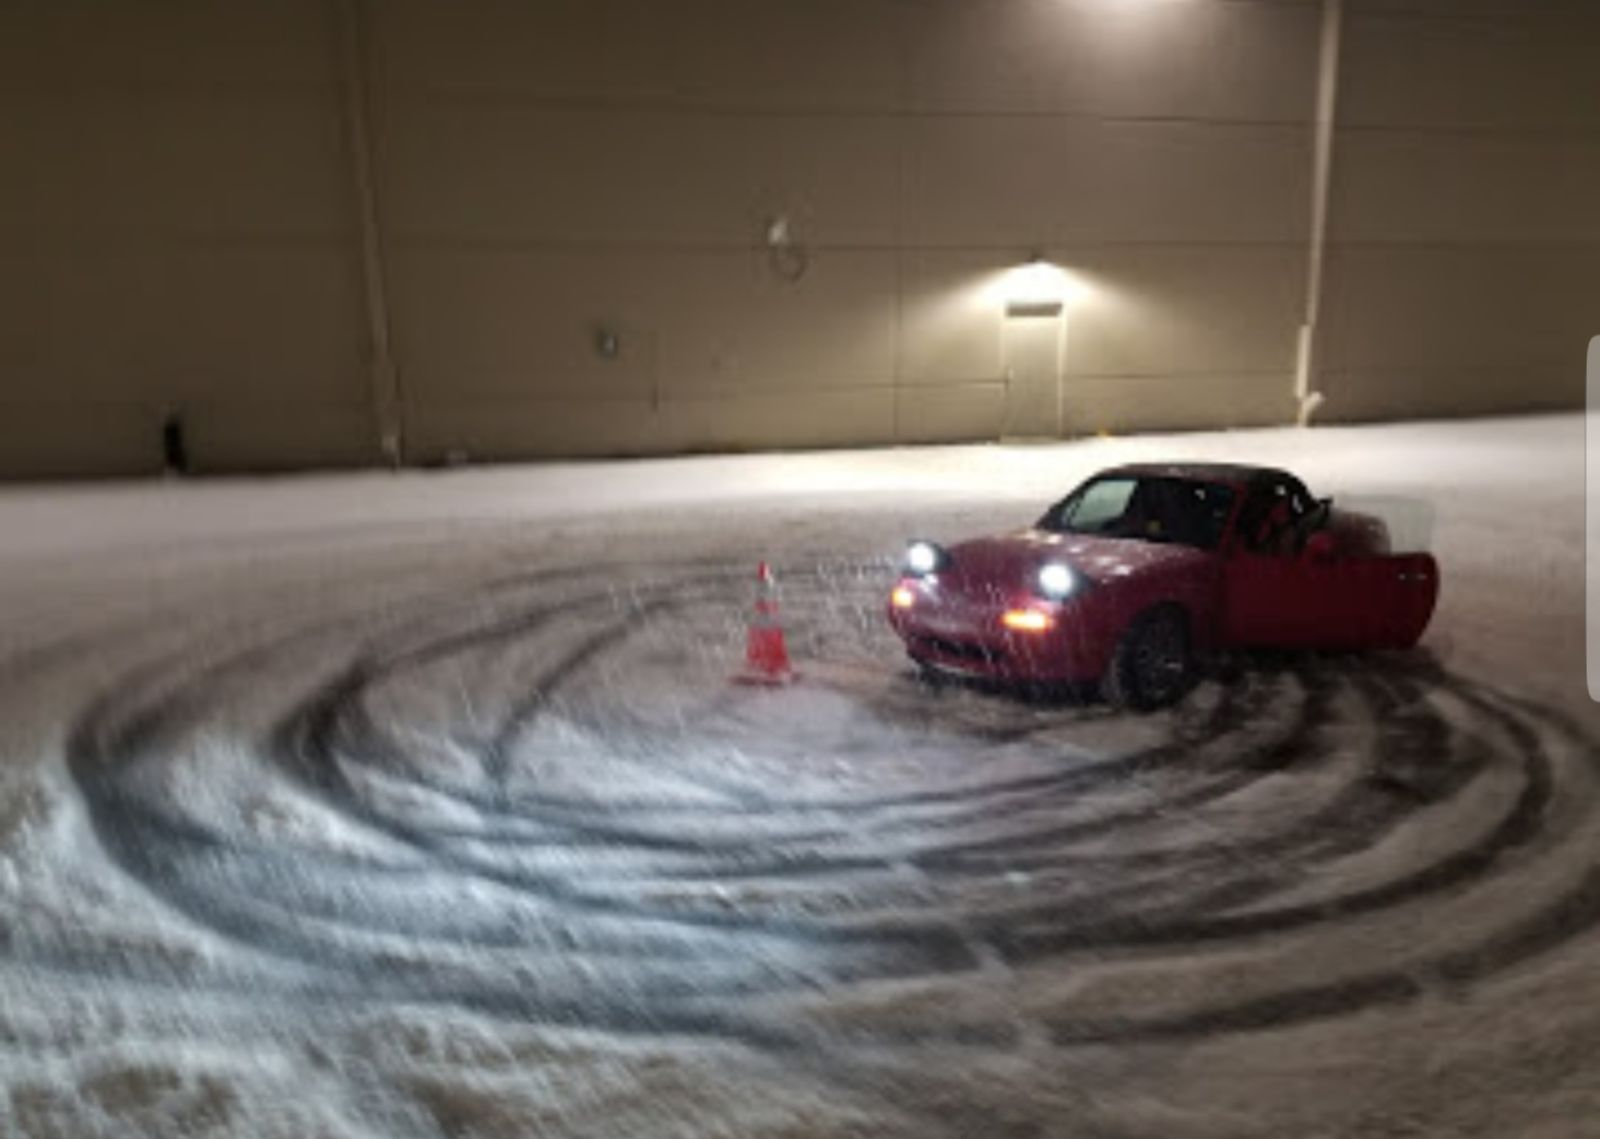 The next day I decided to play around in town. To this day, it’s driving through my shutdown city with the roads covered in snow that is my greatest automotive memory